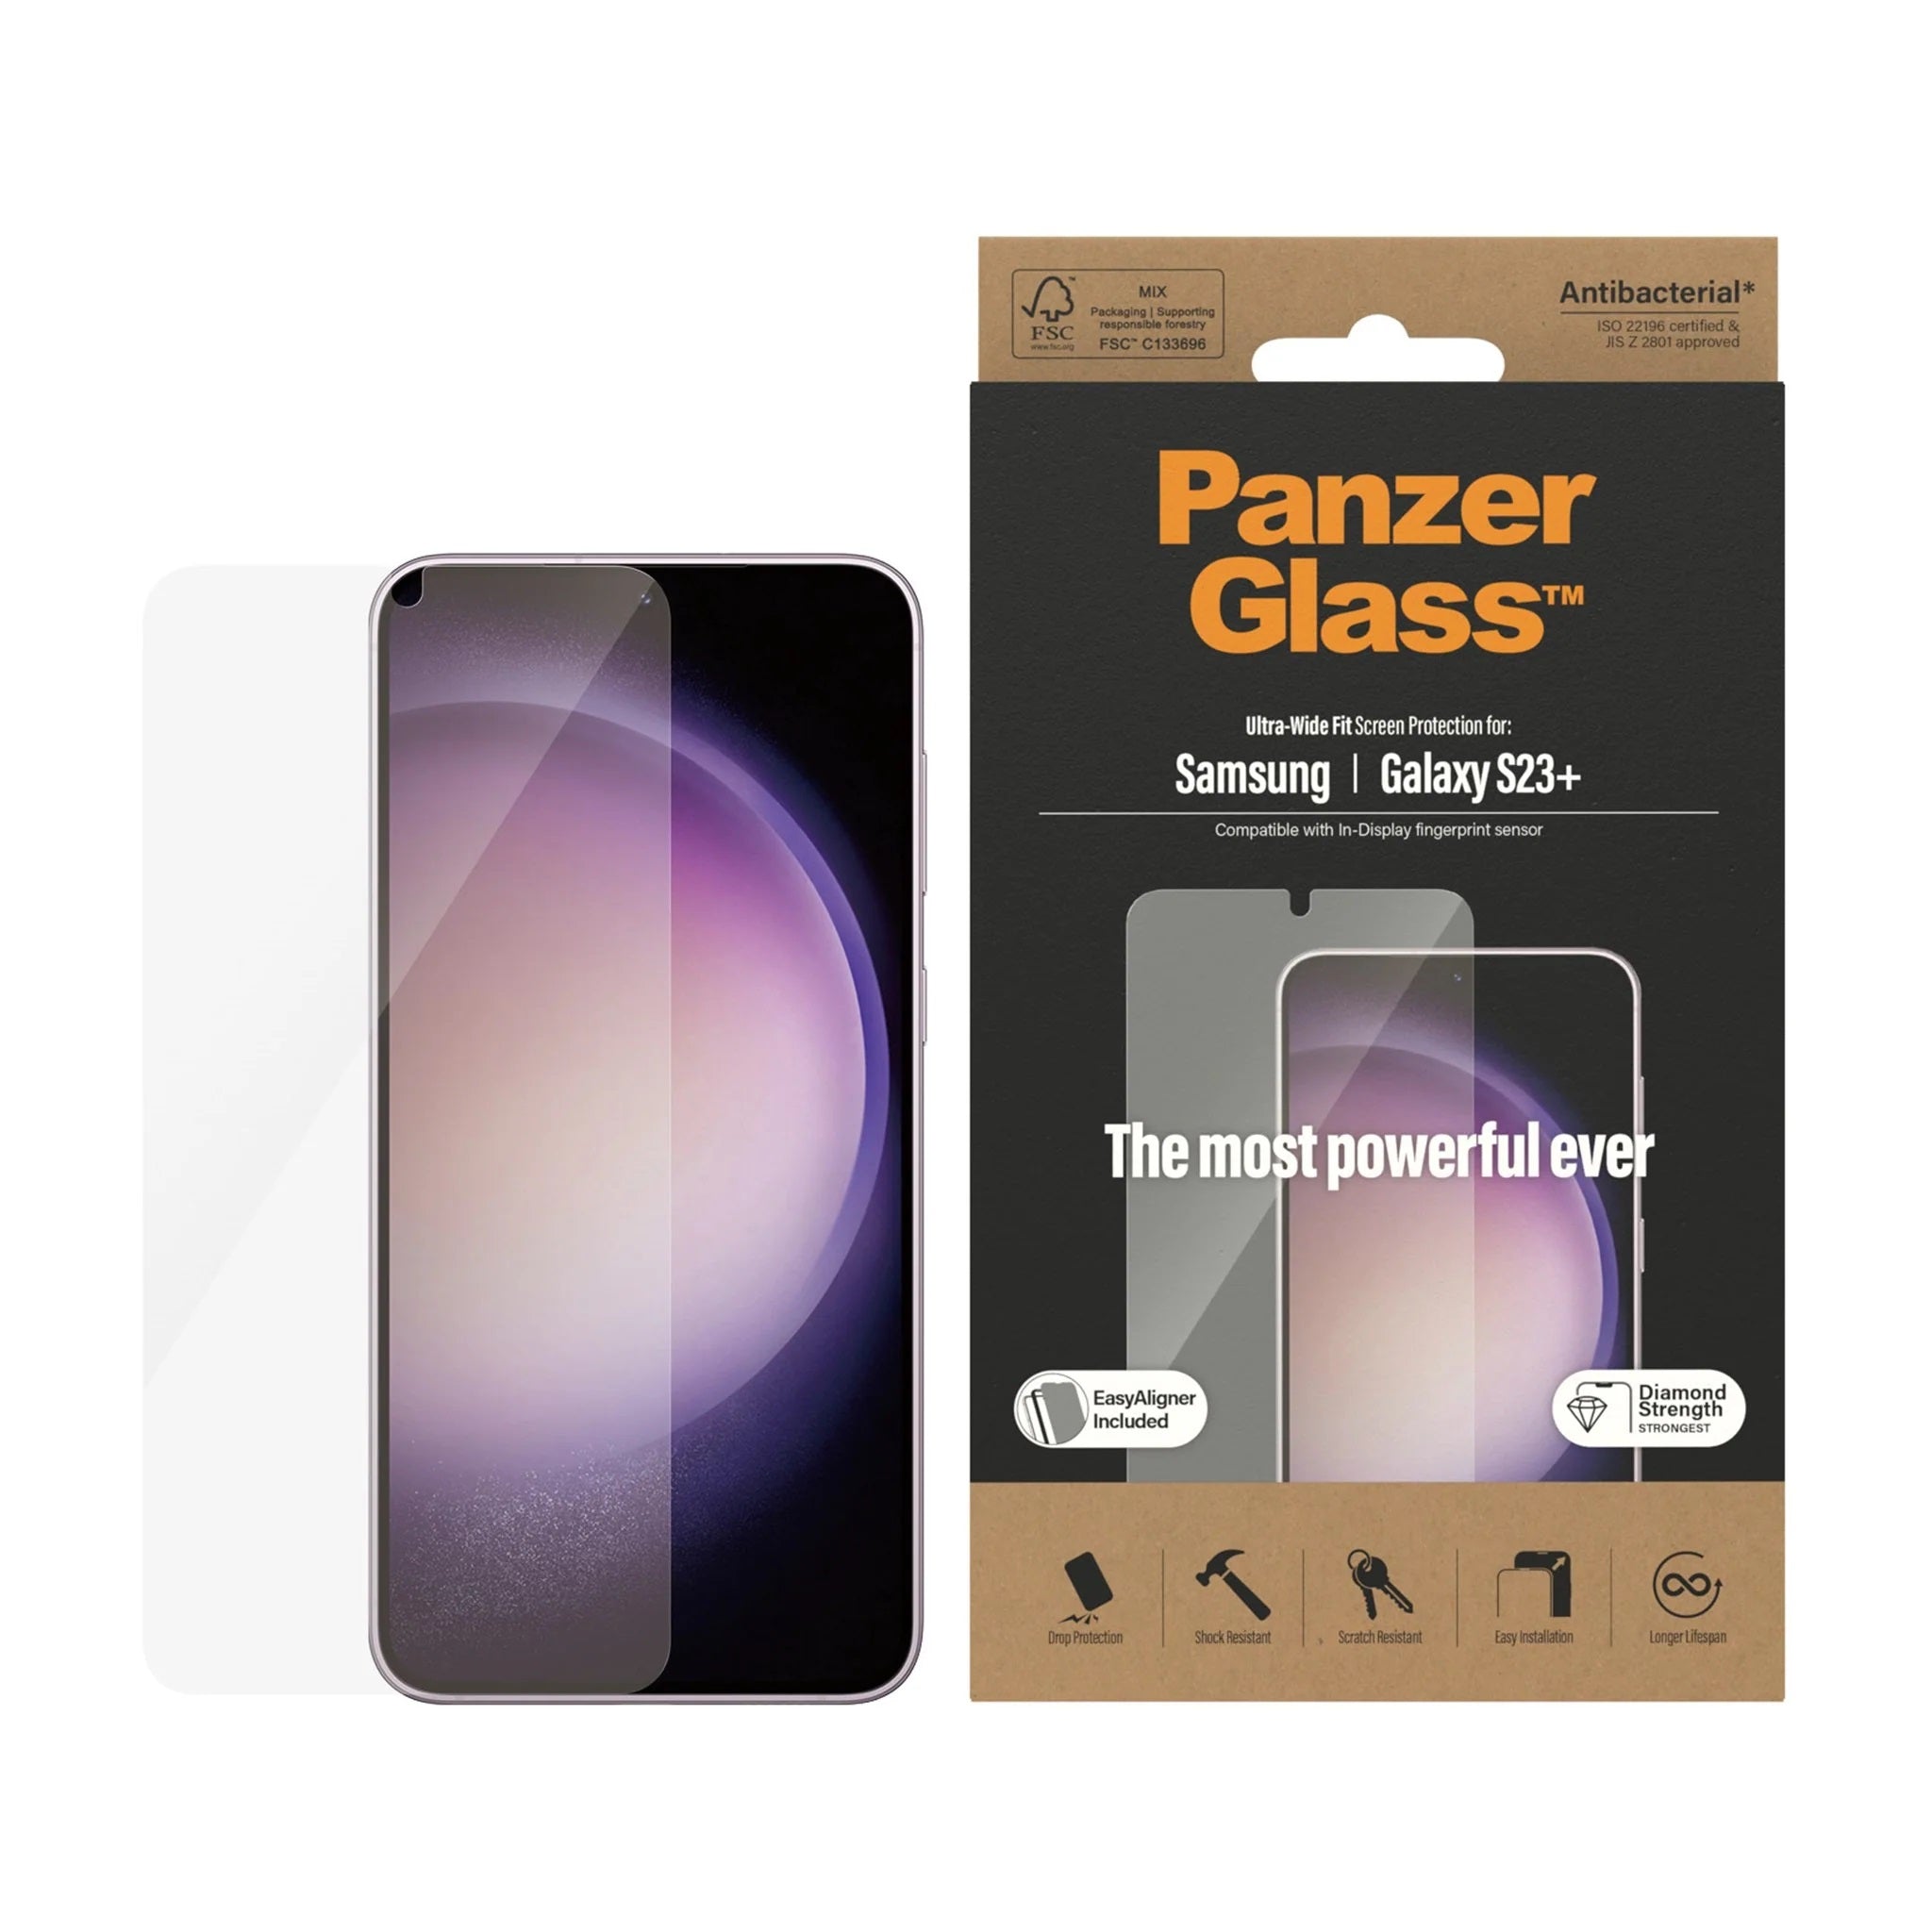 PanzerGlass™ Ultra-Wide fit with EasyAligner Screen Protector for Samsung Galaxy S23 Plus.